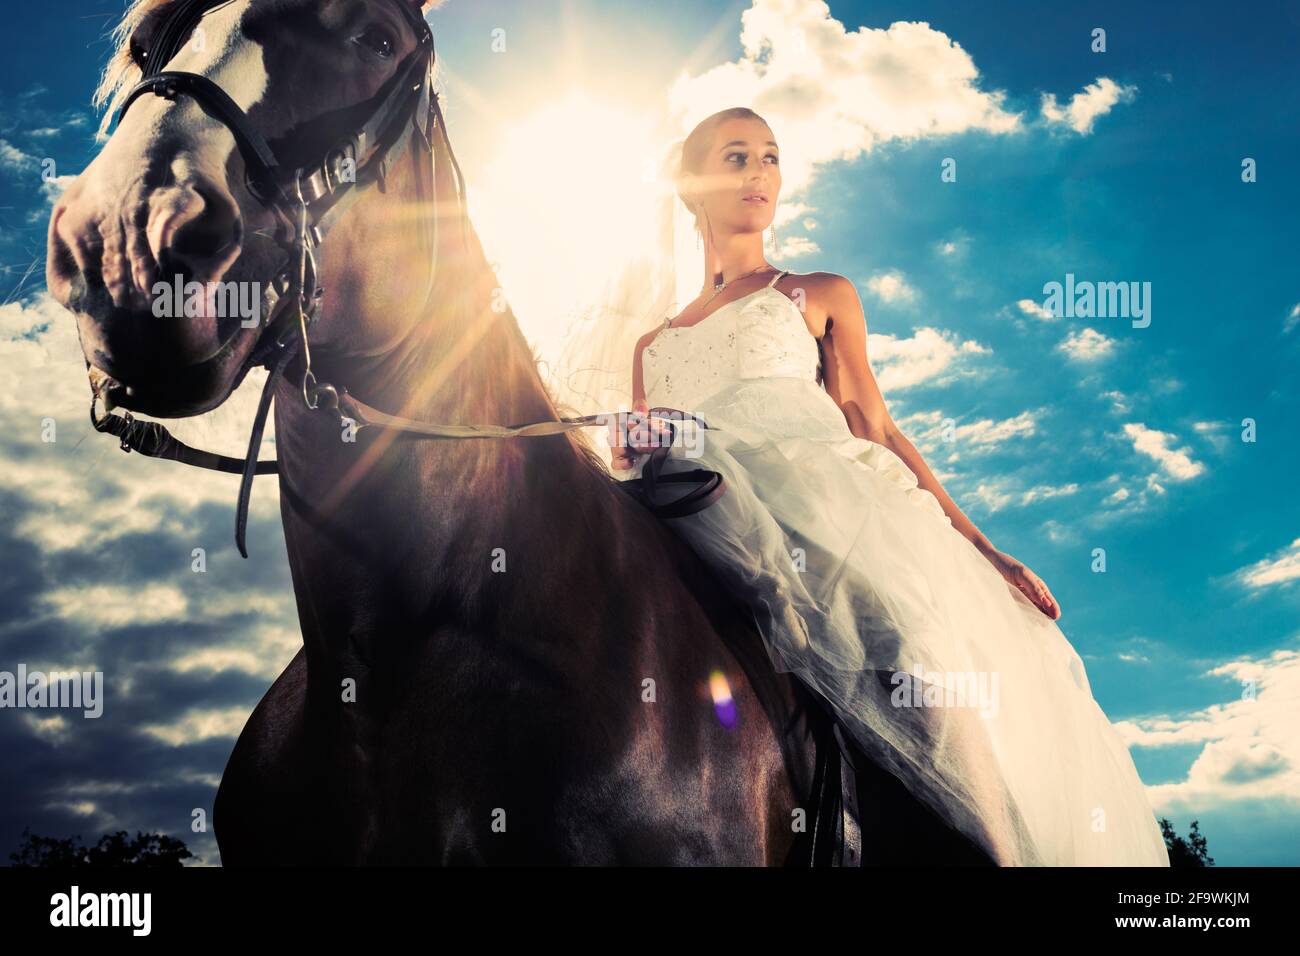 Young Bride in wedding dress riding a horse, backlit picture, dreamy mood Stock Photo